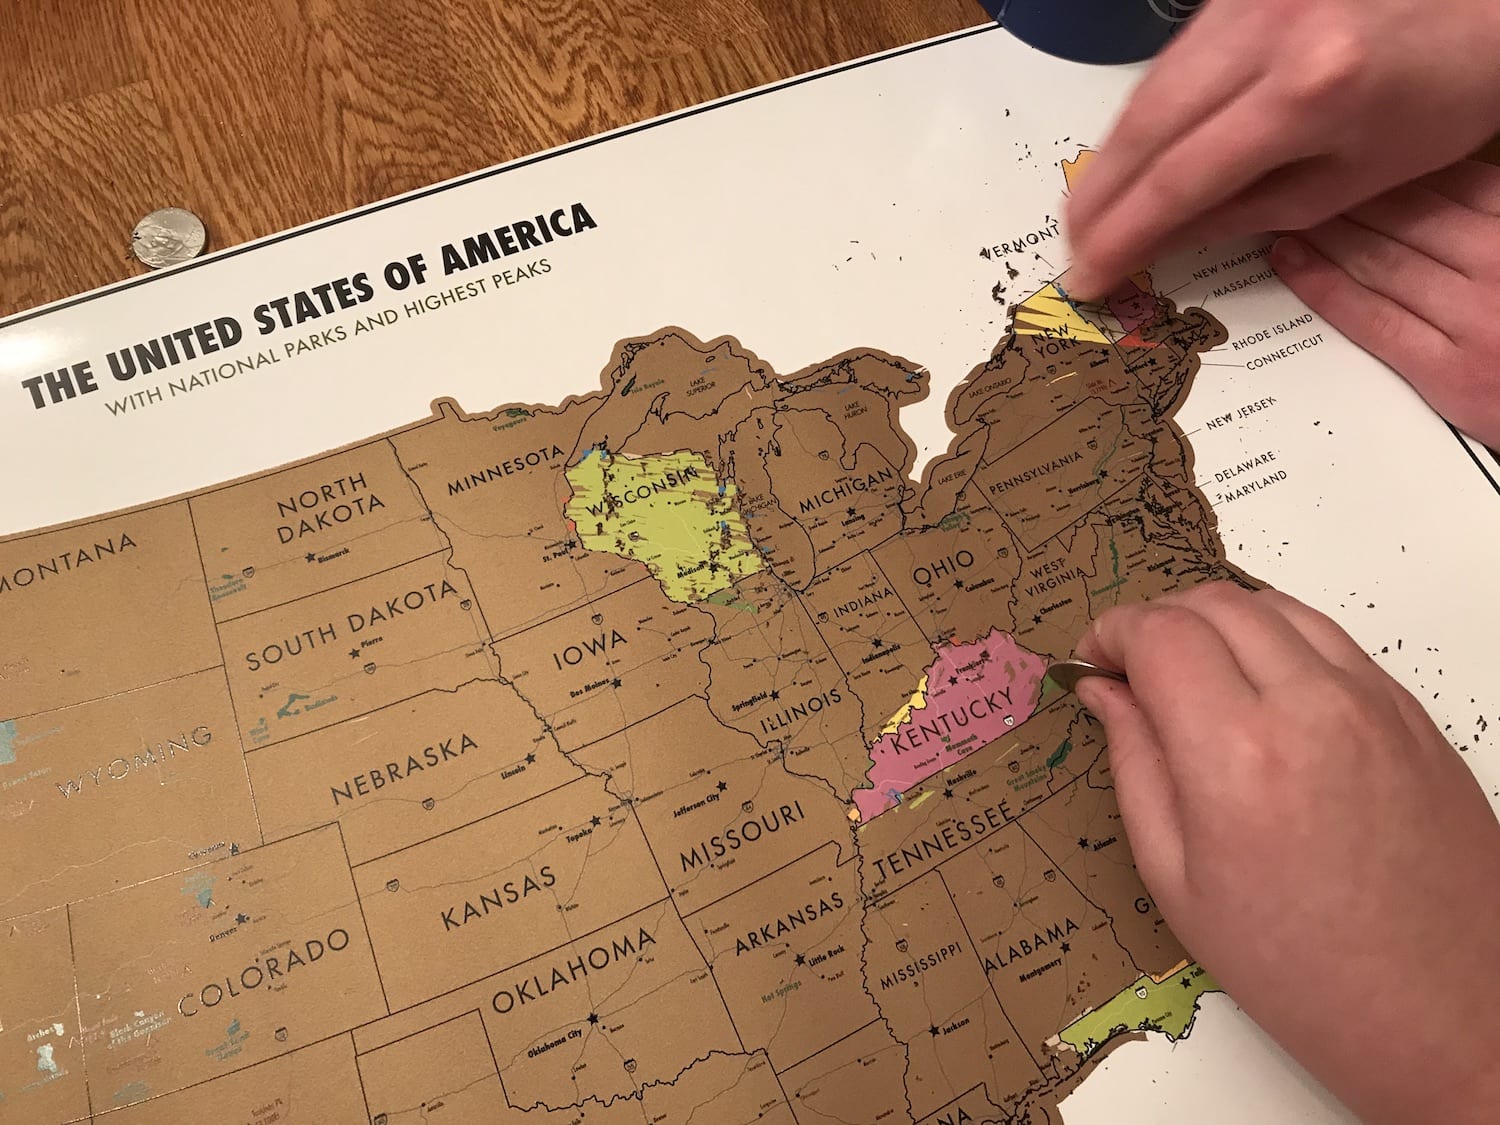 Scratch off travel tracker map of the United States of America